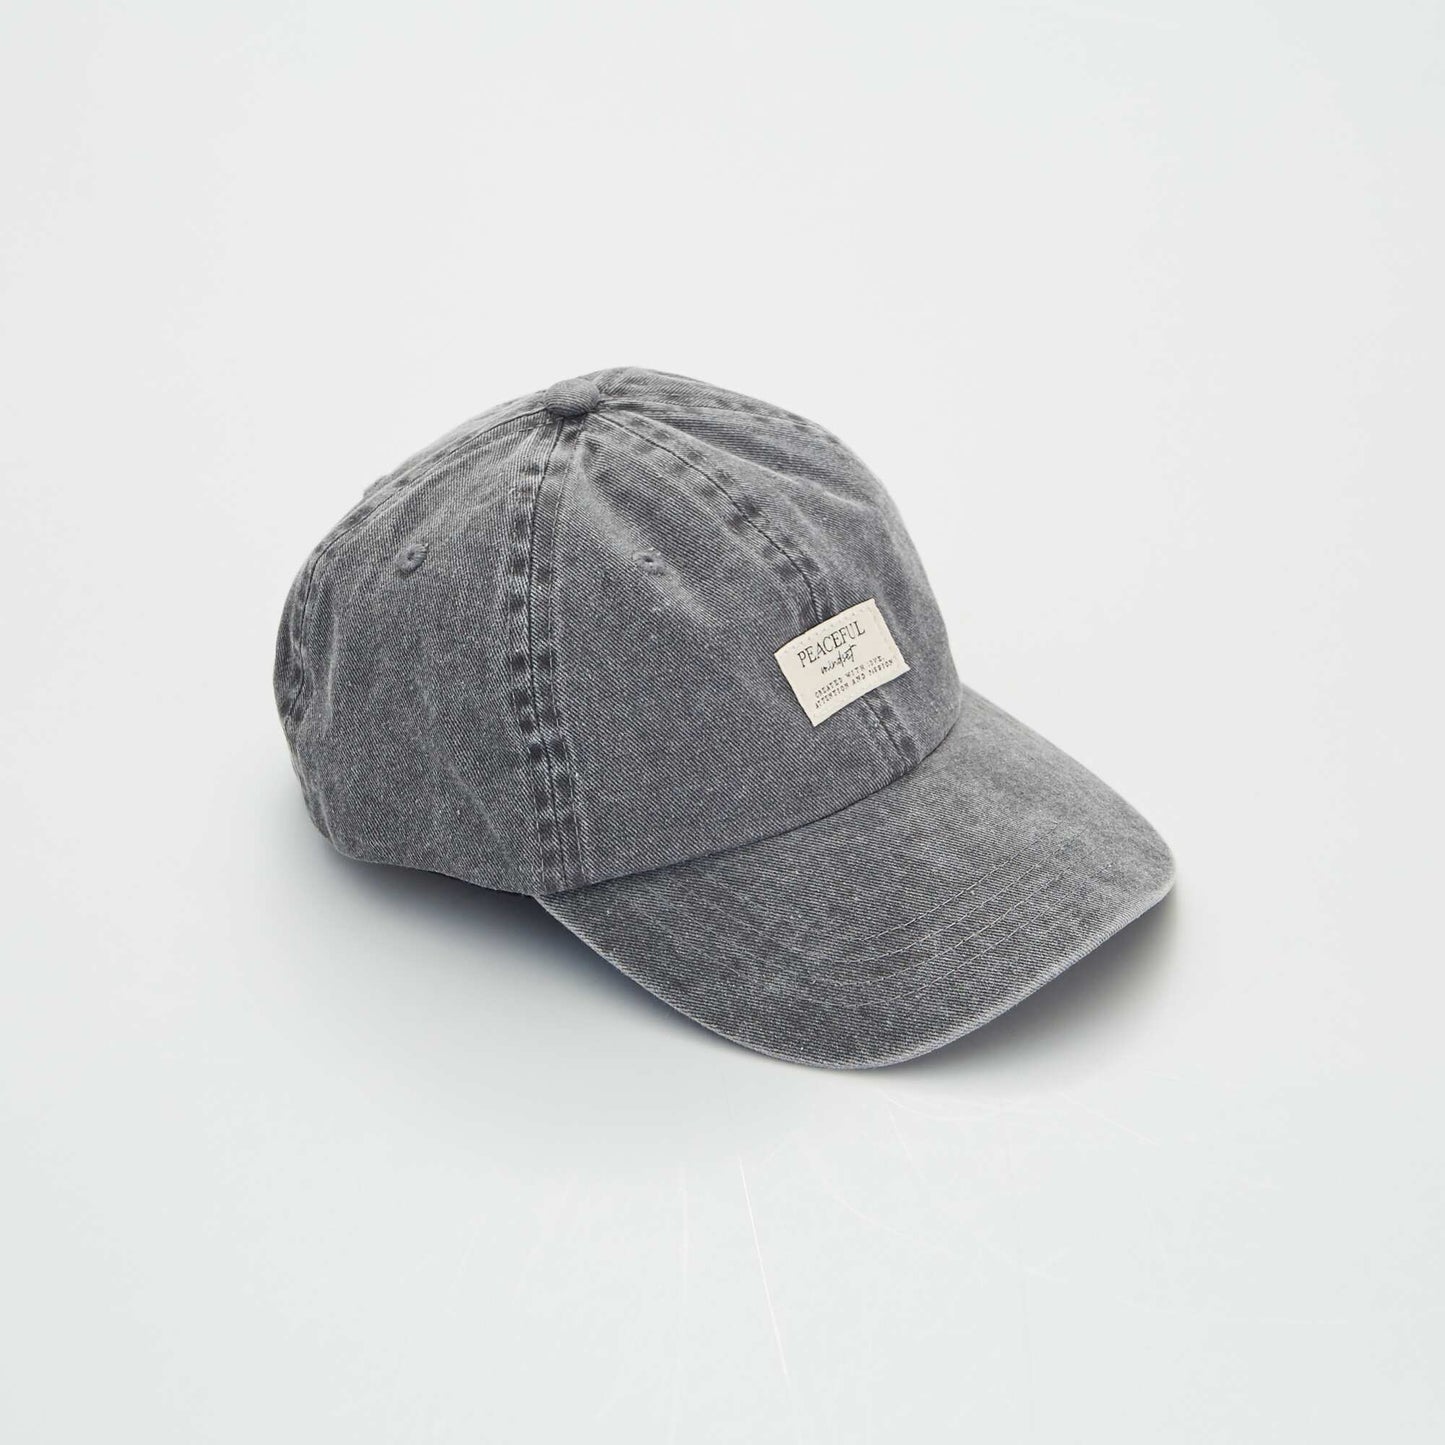 Canvas cap with print on the front BLACK